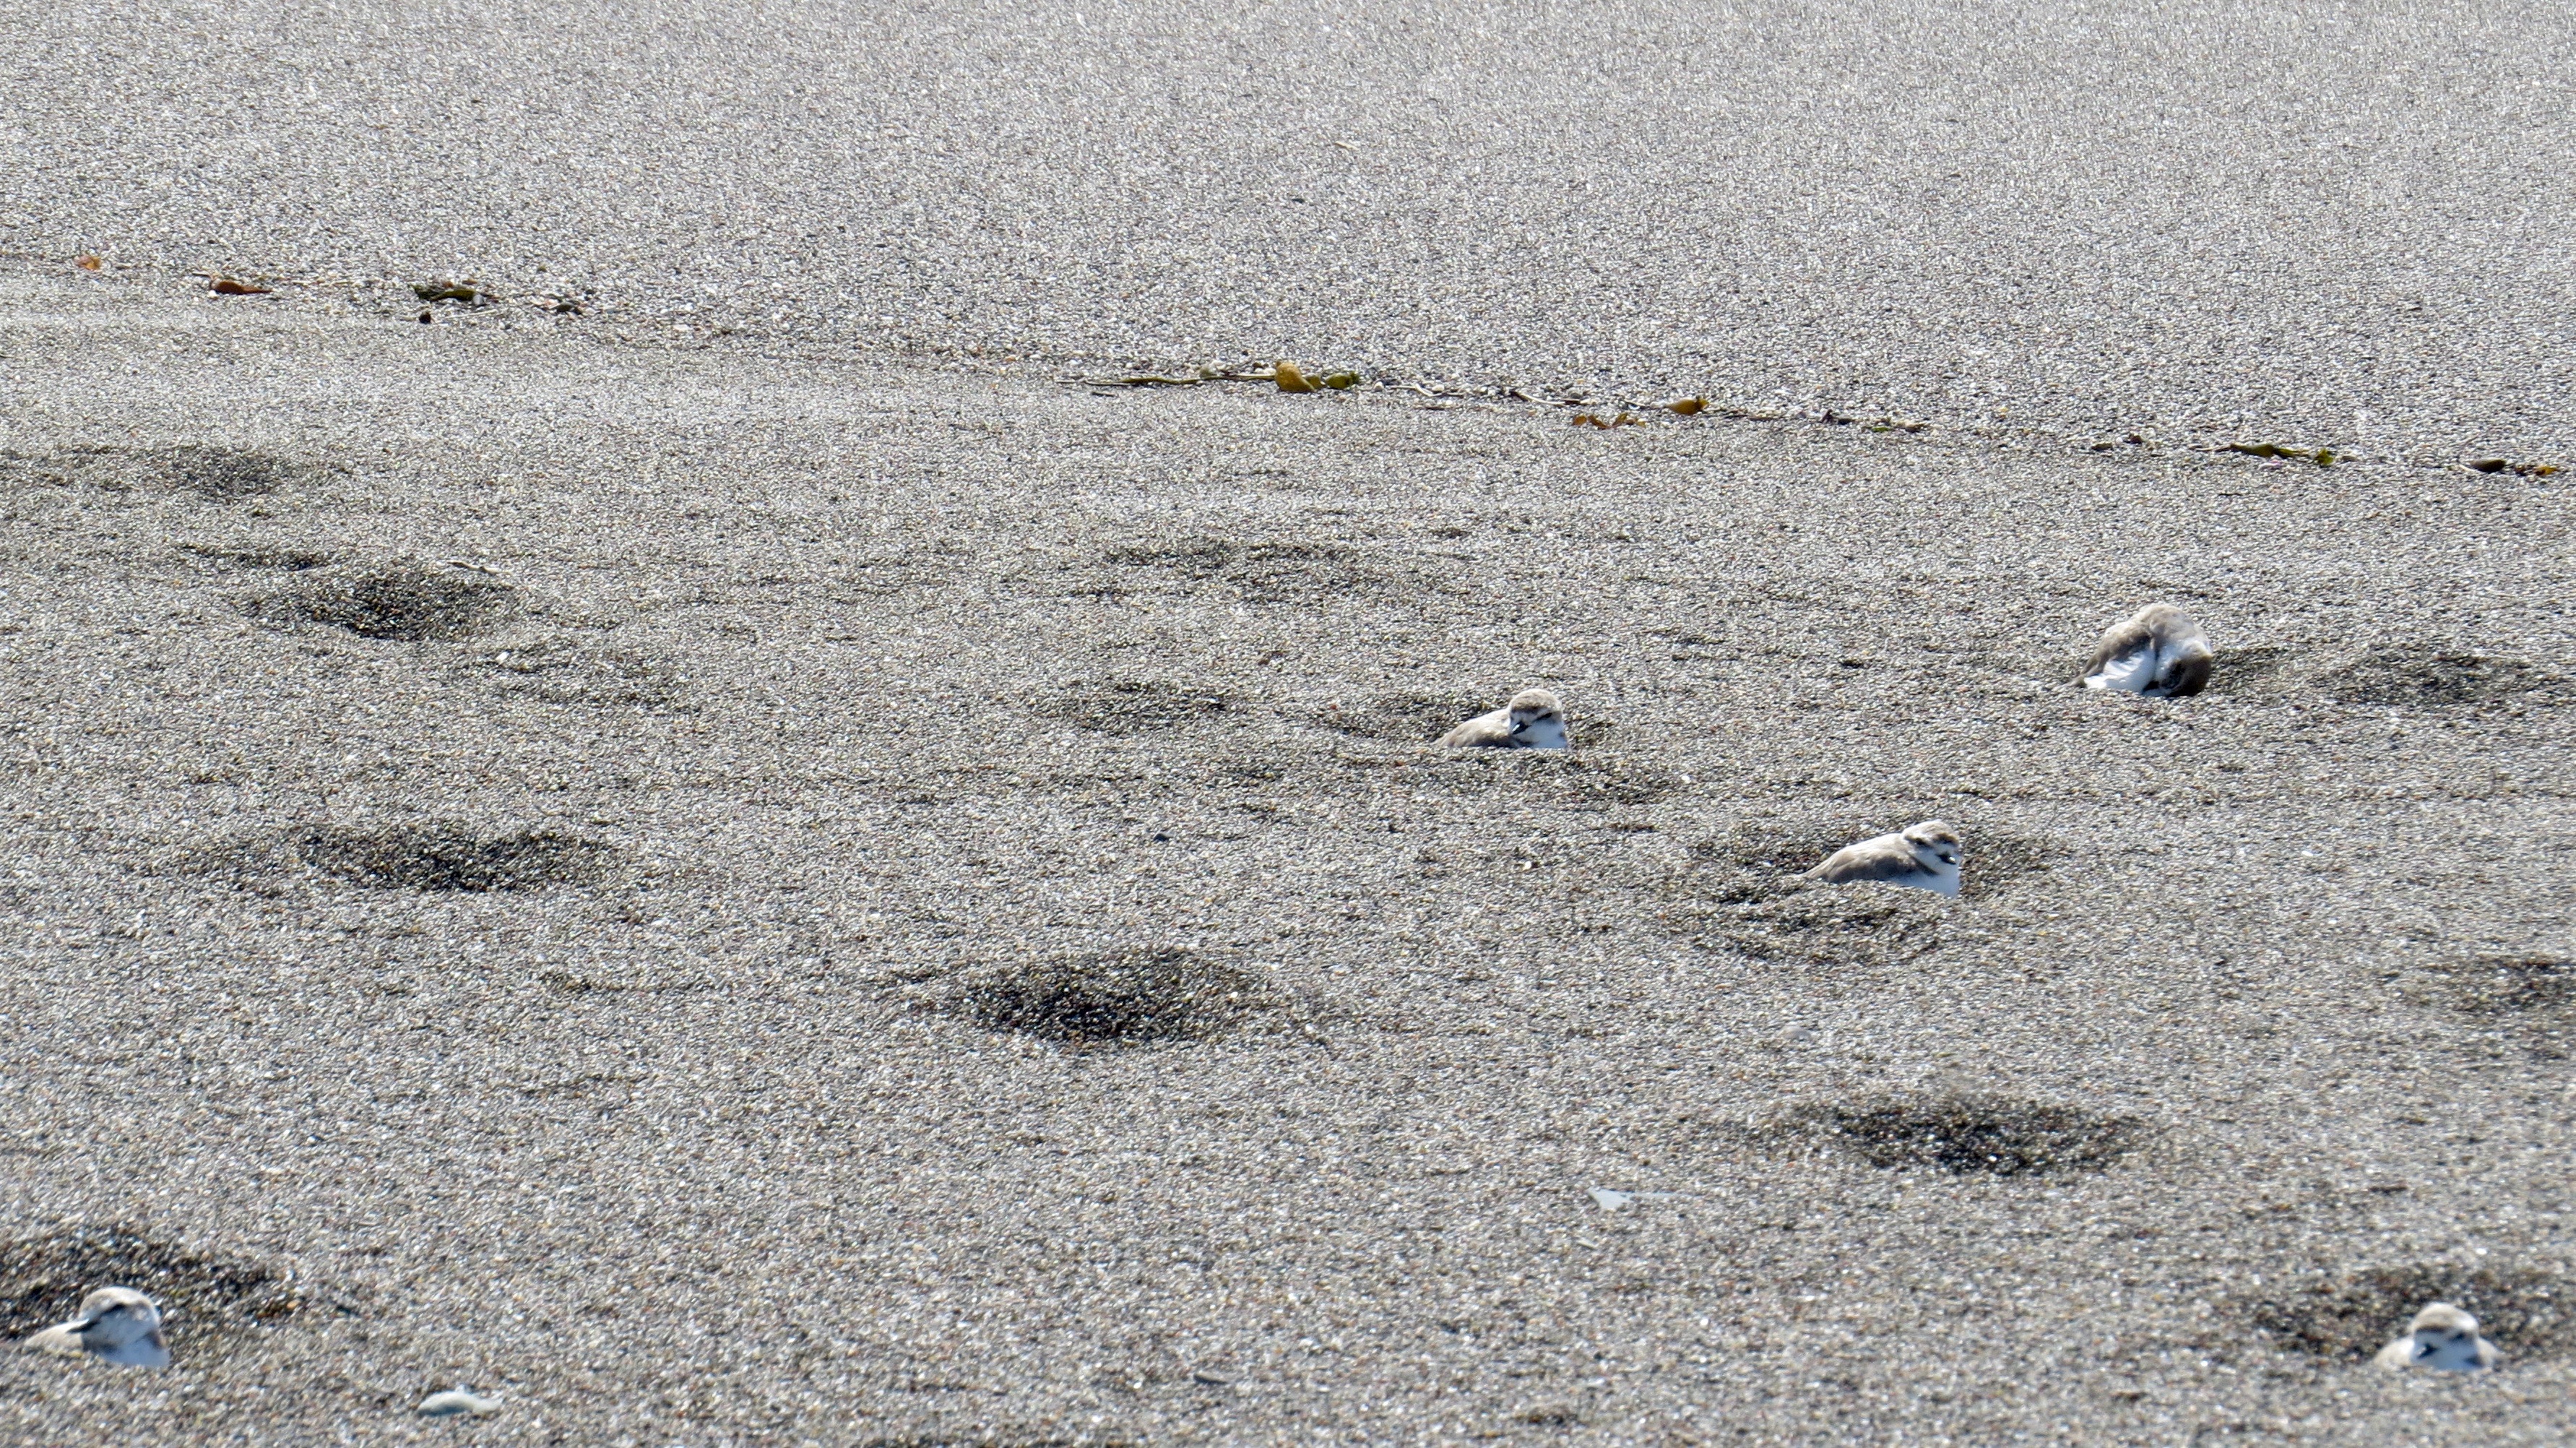 Even though I was quite a distance from the plovers, they did not like me and left their nests. I quickly left and they returned to duty.